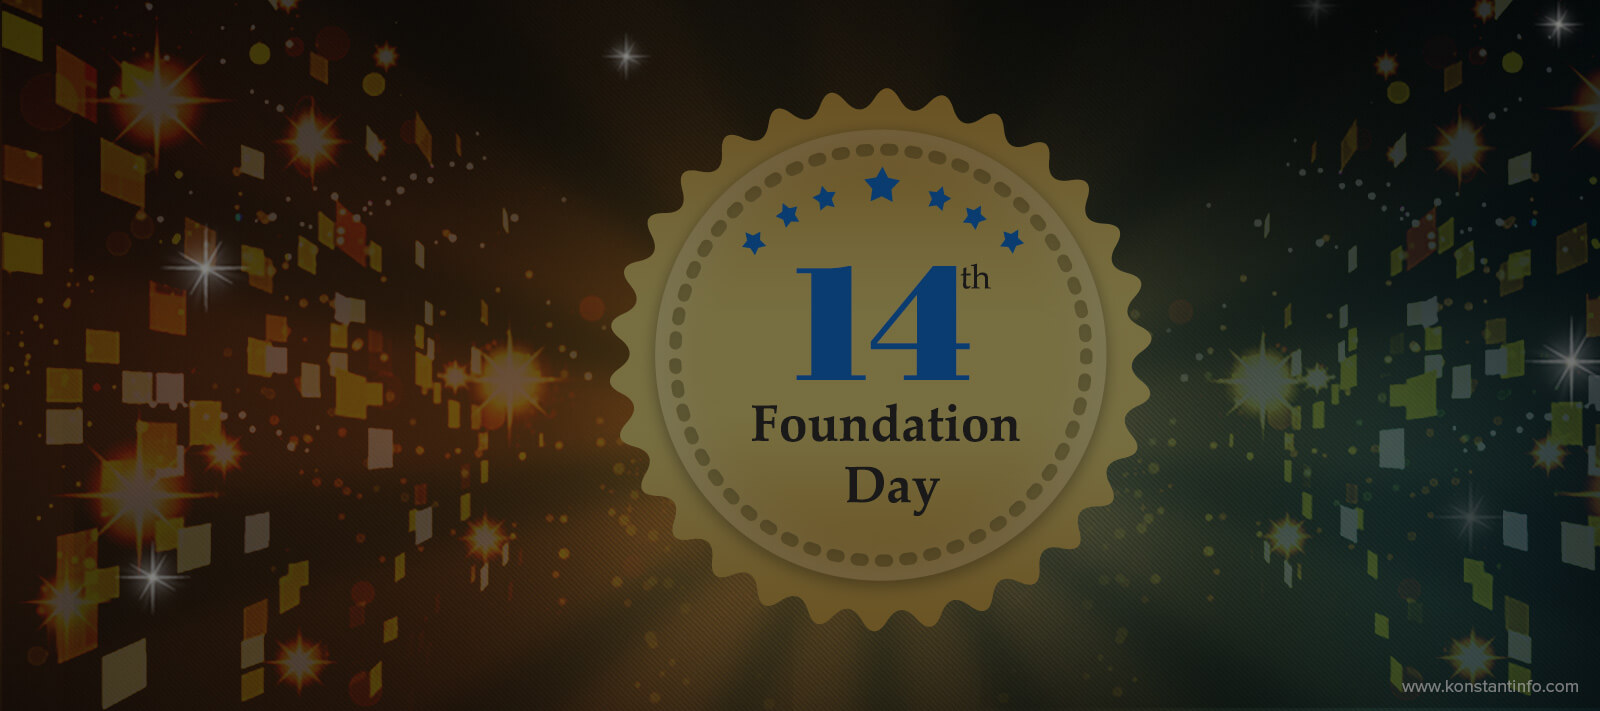 14th Foundation Day @ Konstant Infosolutions